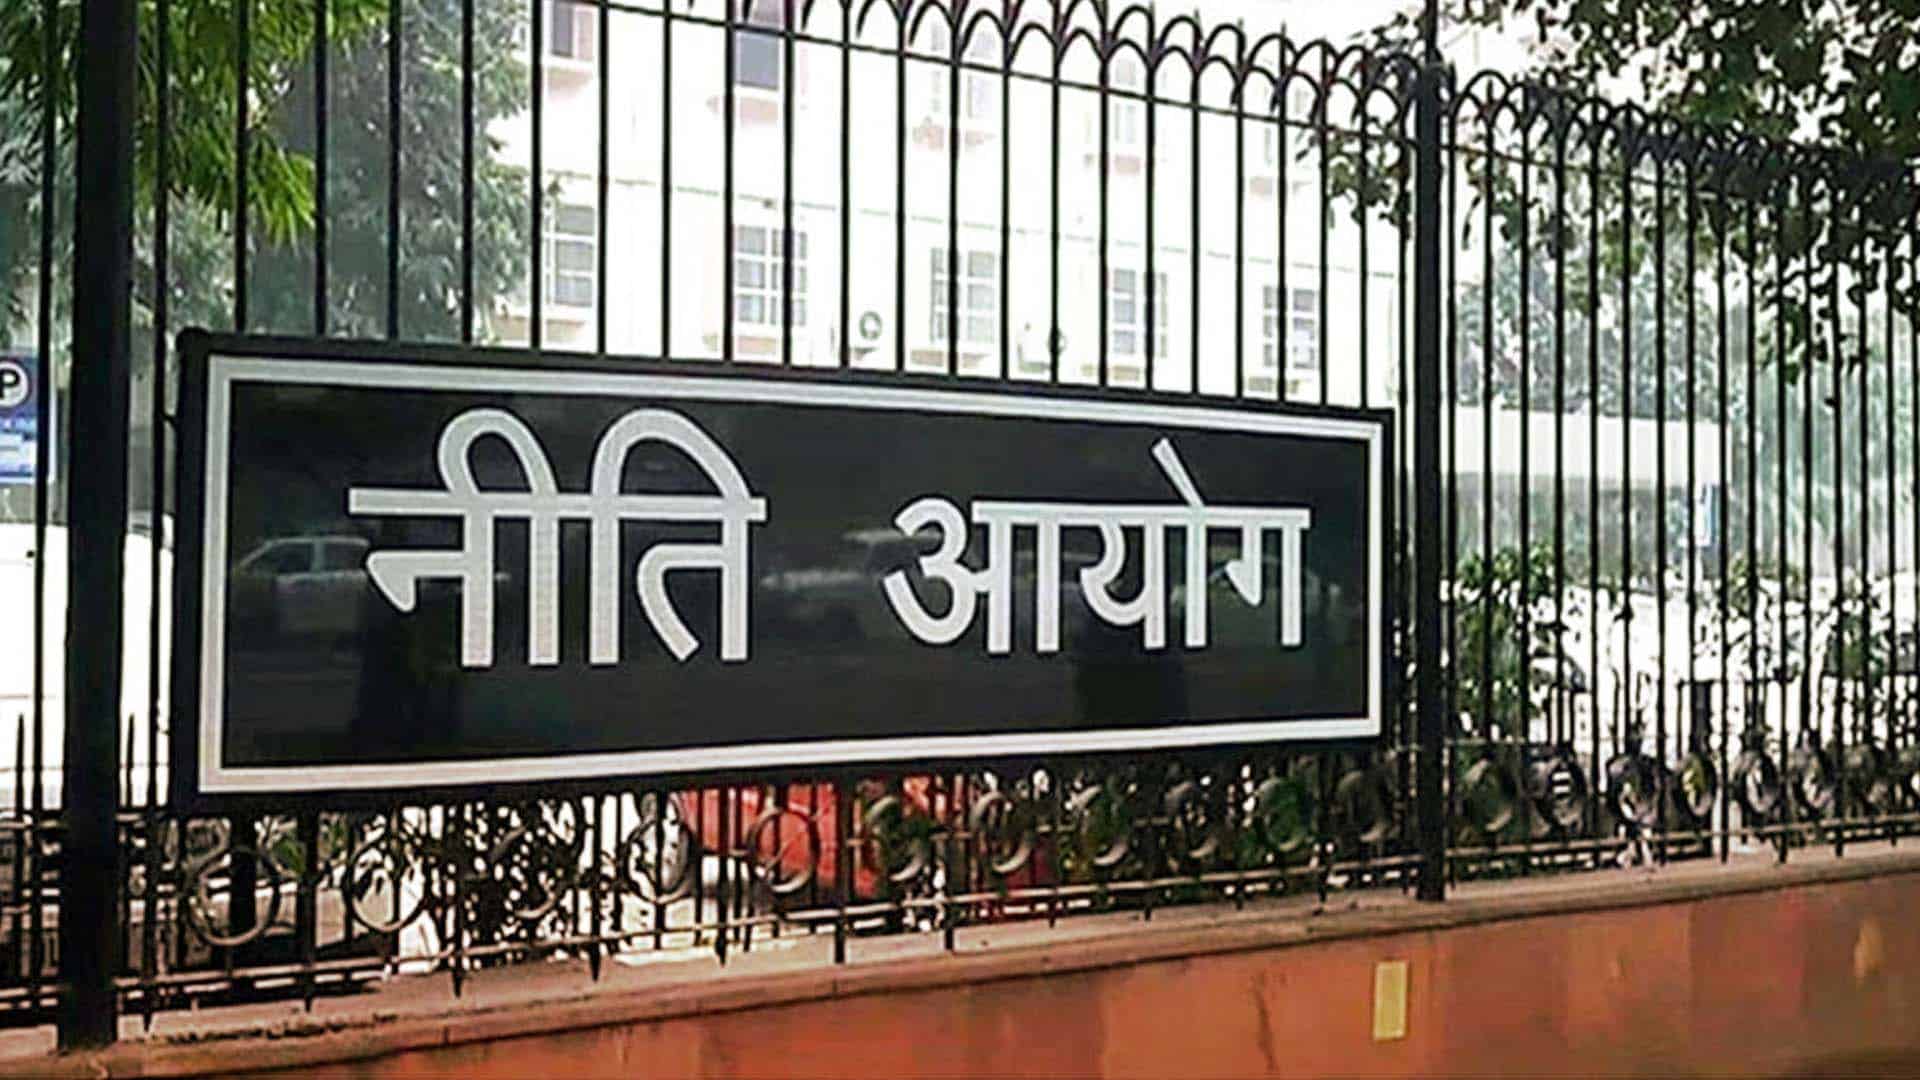 NITI Aayog's State Energy and Climate Index: Gujarat tops_40.1